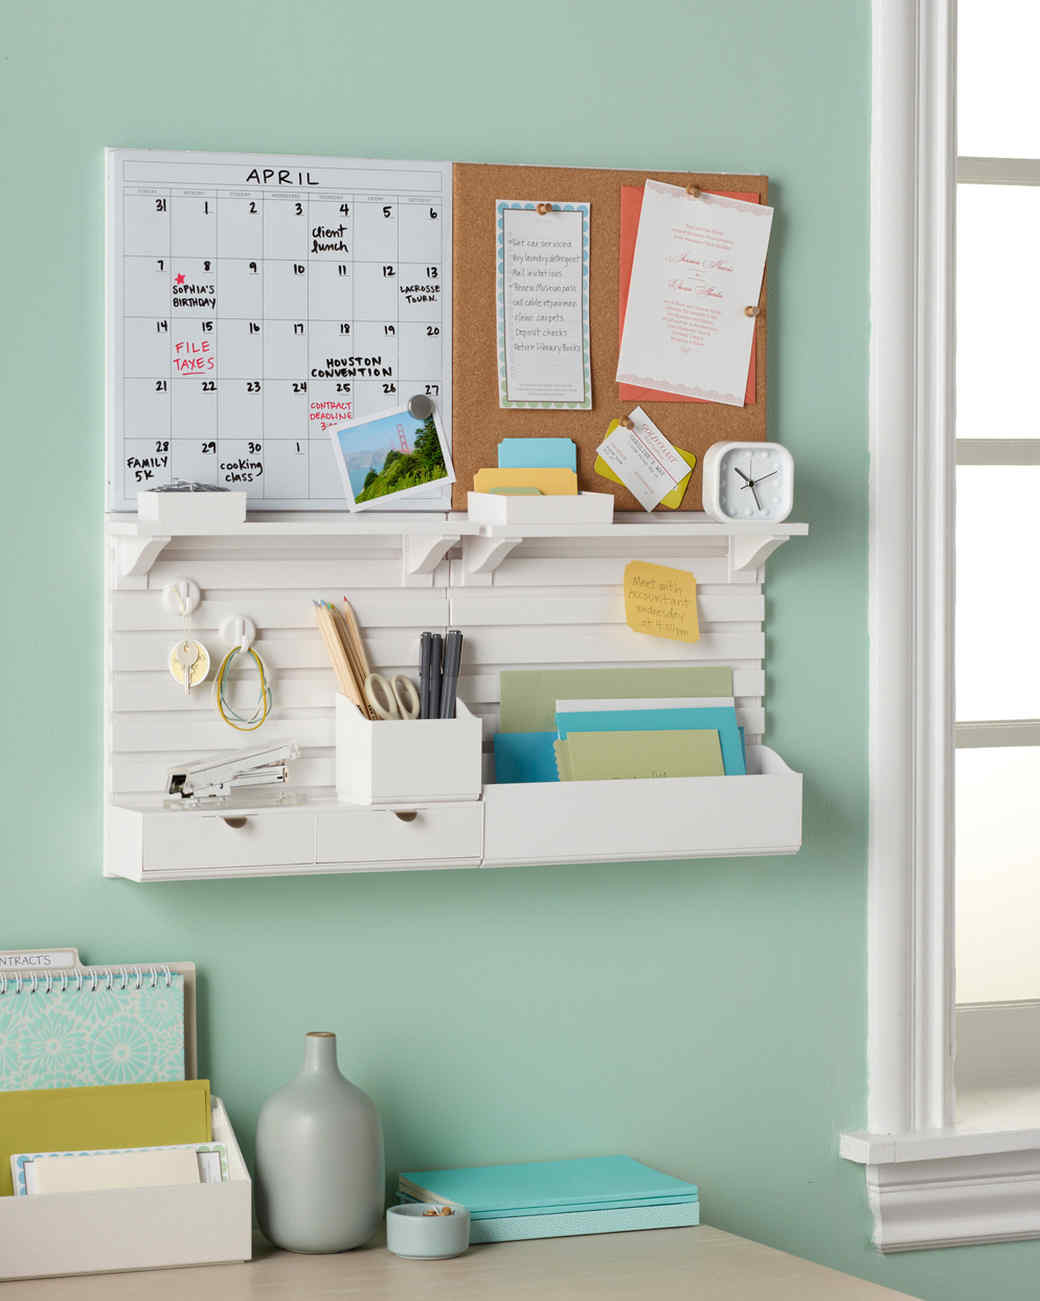 Home Office Wall Organizer
 Martha Stewart Home fice with Avery Exclusively at